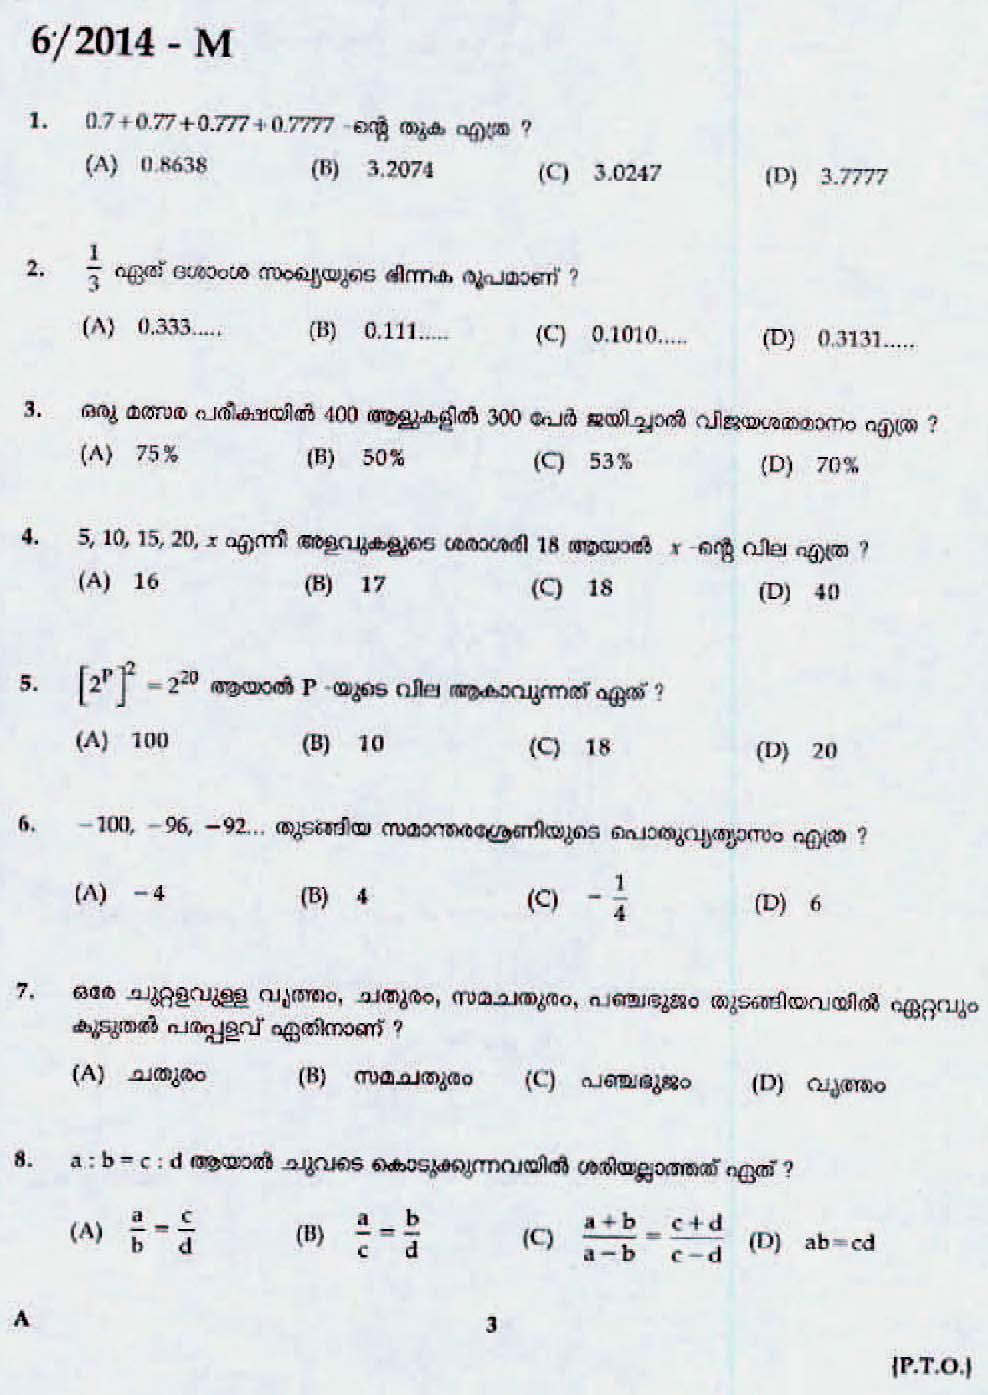 LD Clerk Question Paper Malayalam 2014 Paper Code 062014 M 1